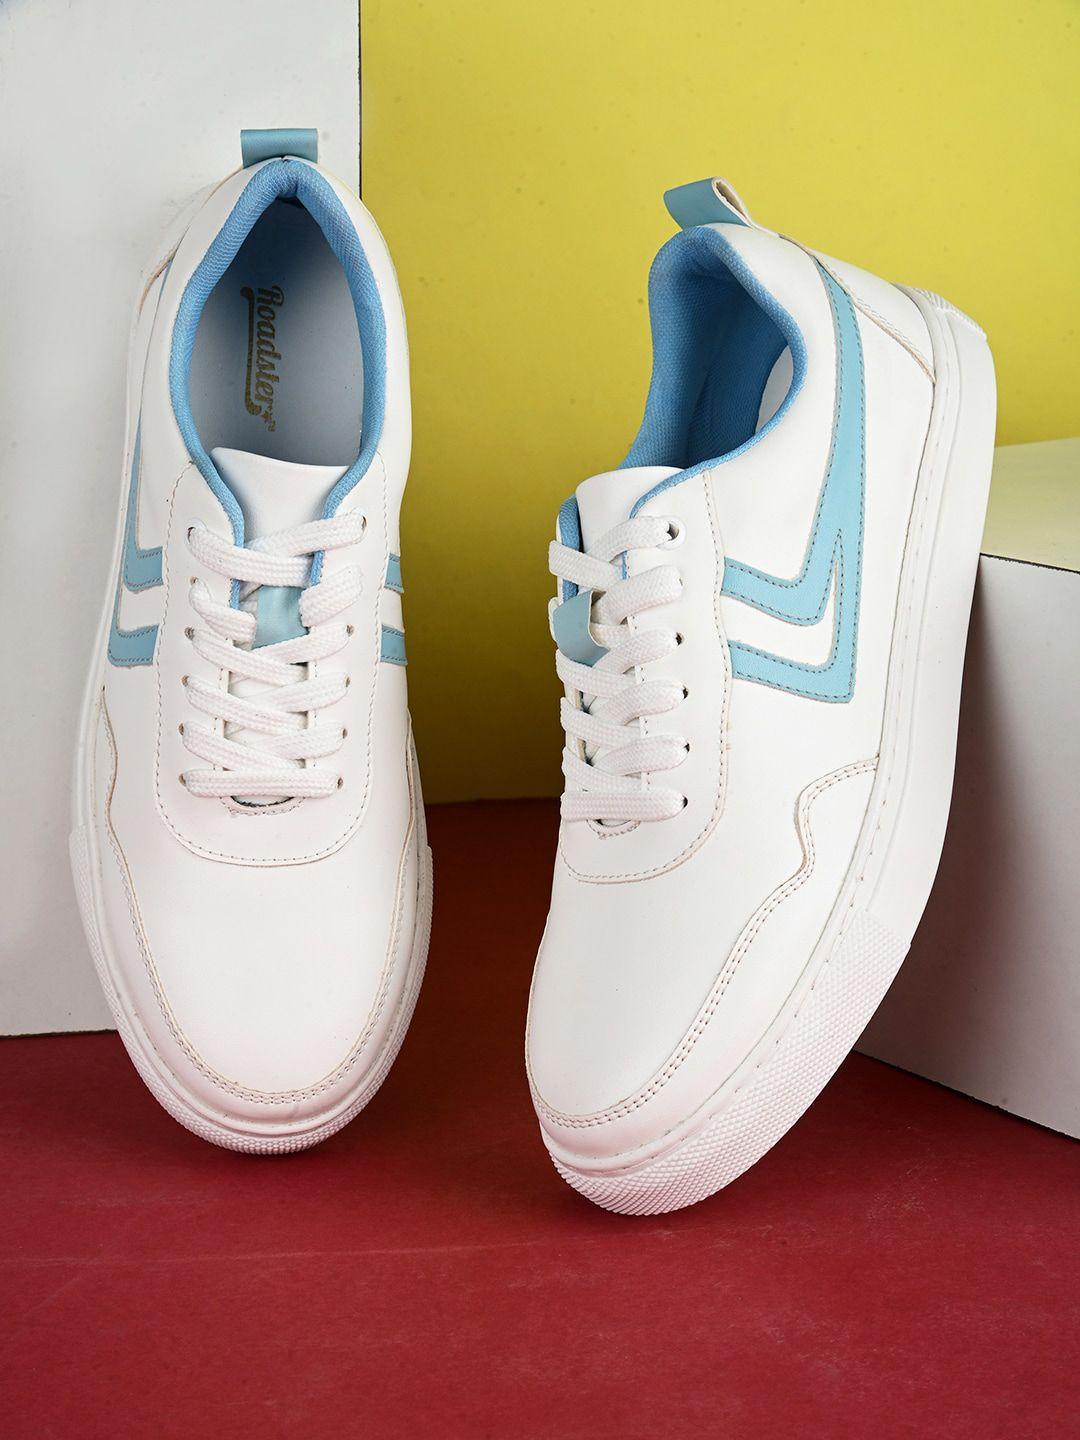 the roadster lifestyle co. women white and blue lightweight sneakers